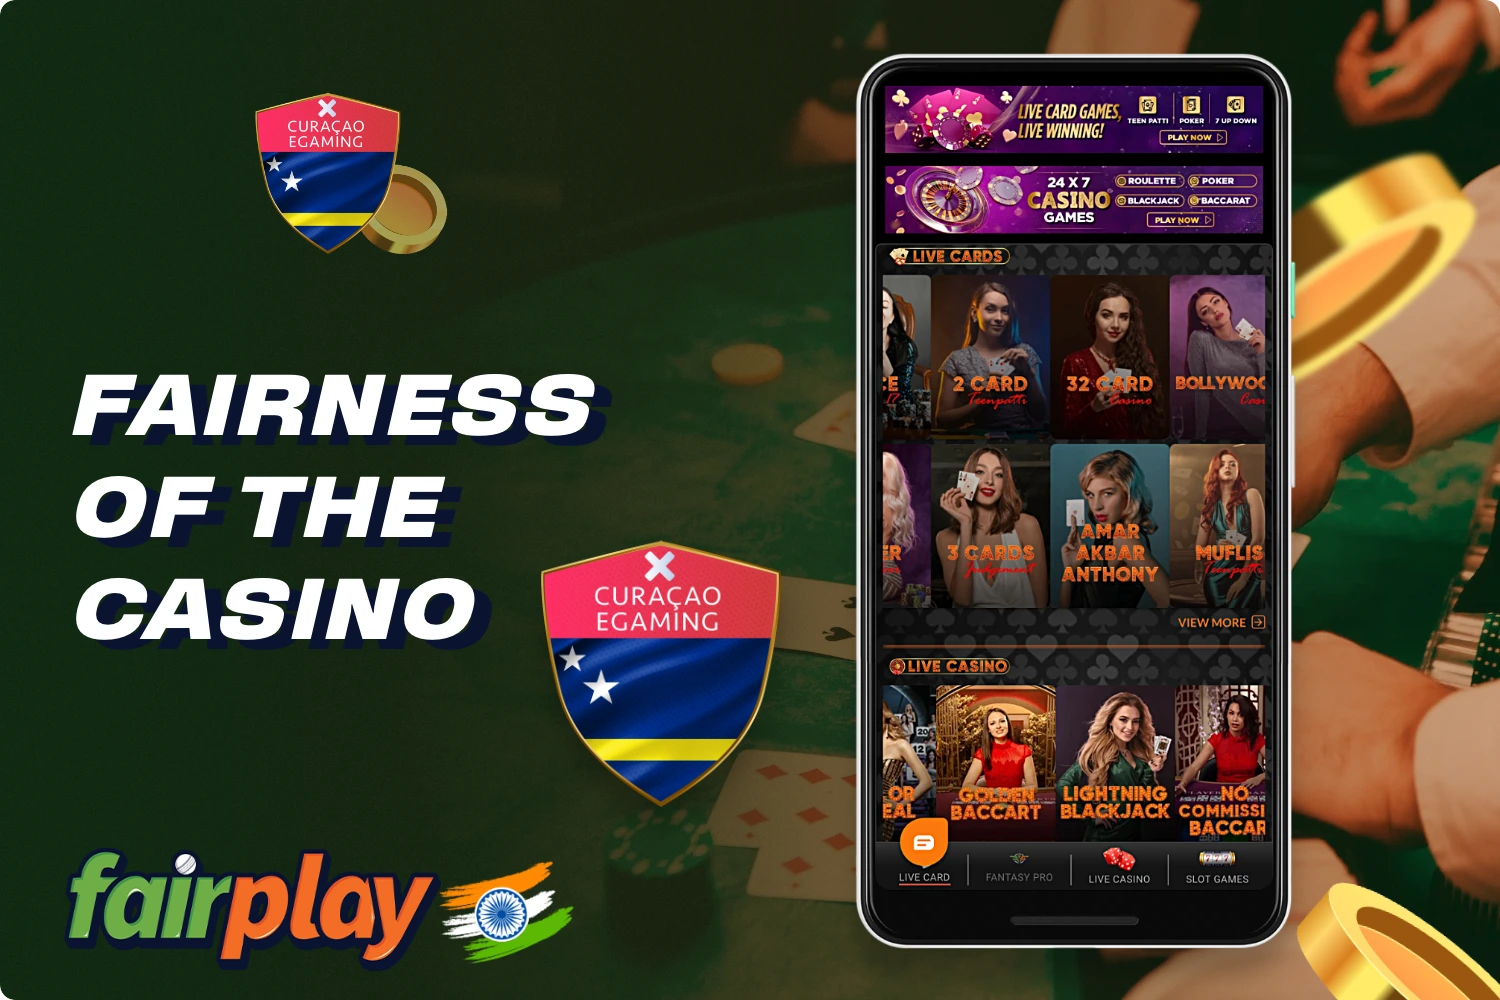 Fairplay Casino operates in accordance with the available license and offers users games from bona fide and world-renowned software manufacturers